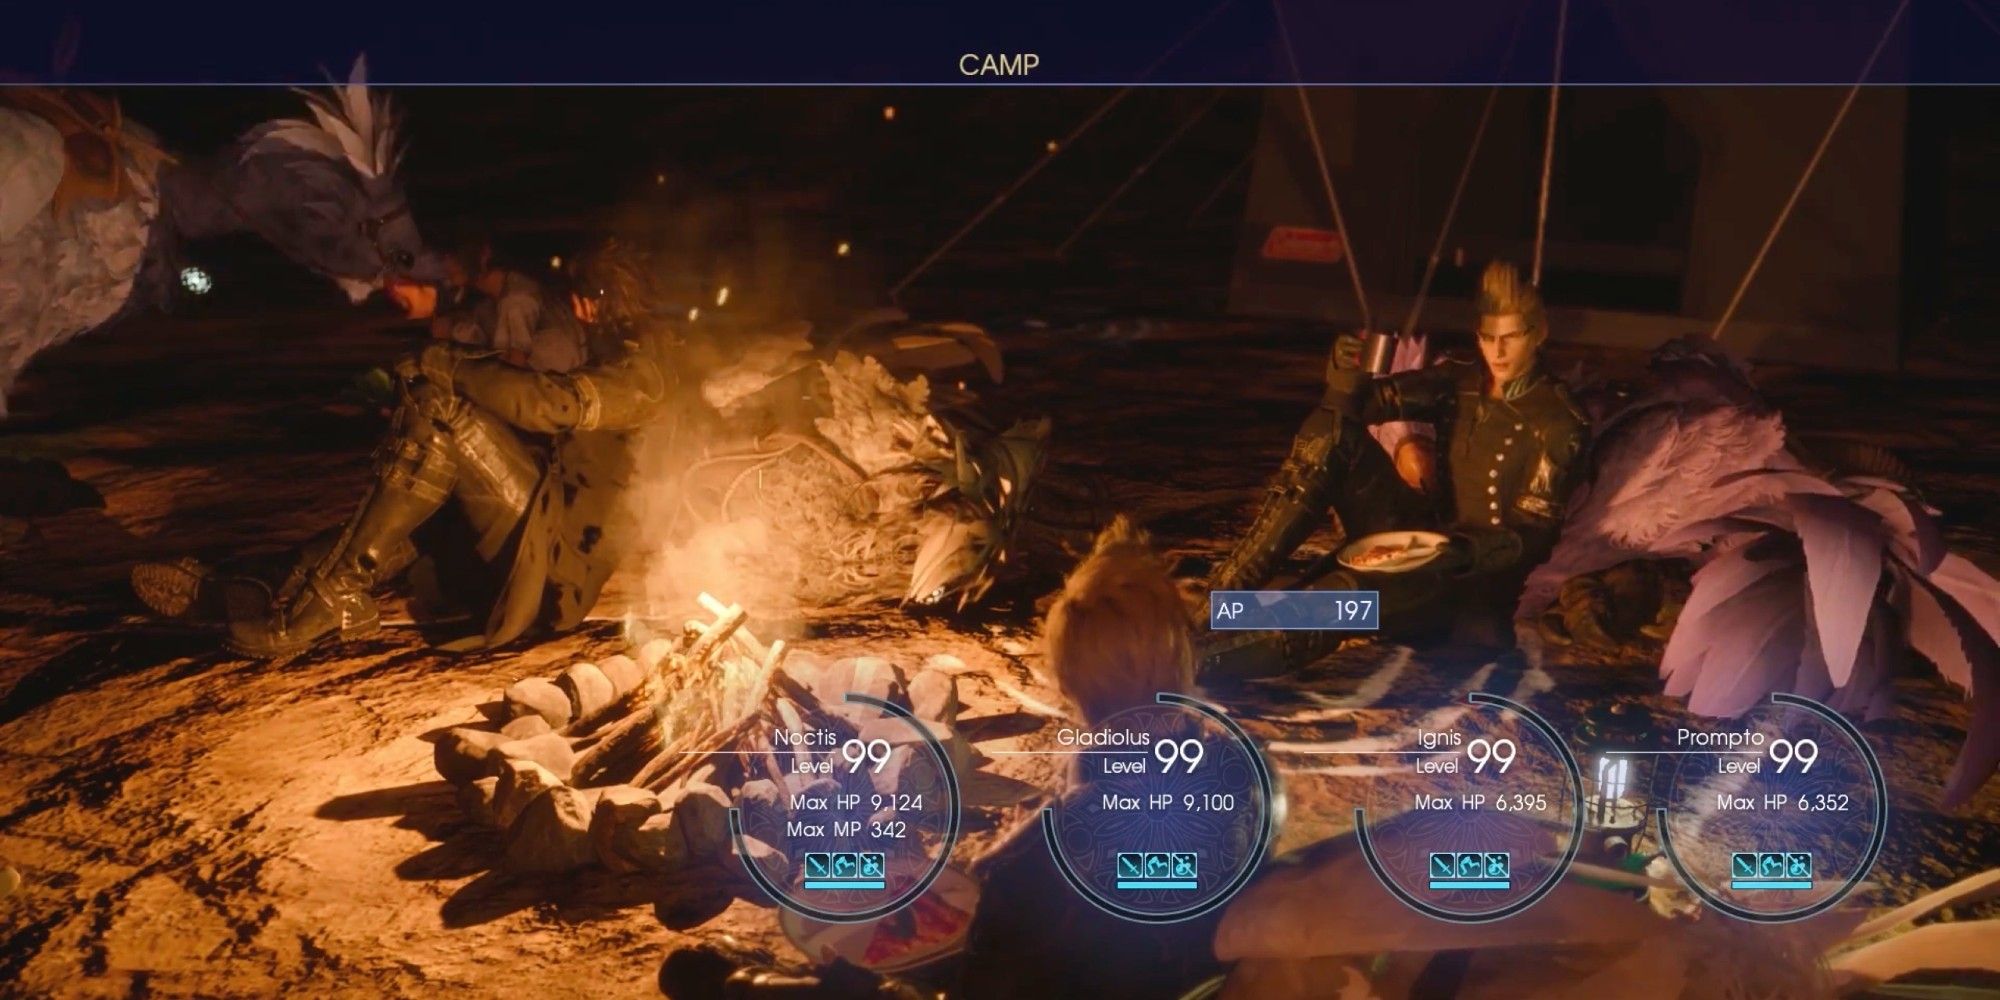 Final Fantasy 15 the boys leveling up at camp after a long day